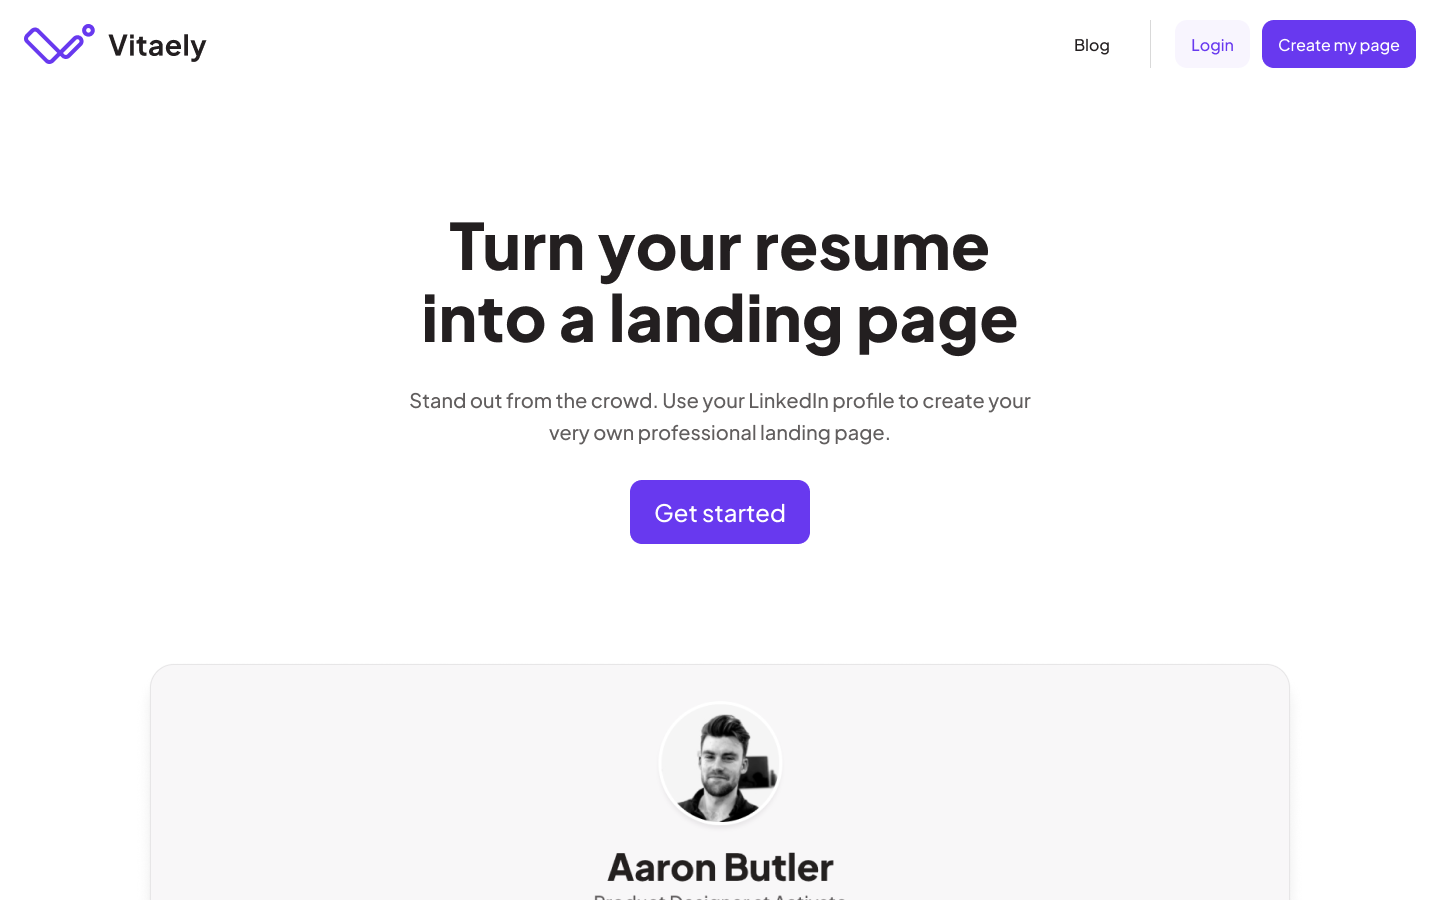 Vitaely landing page: Variant B